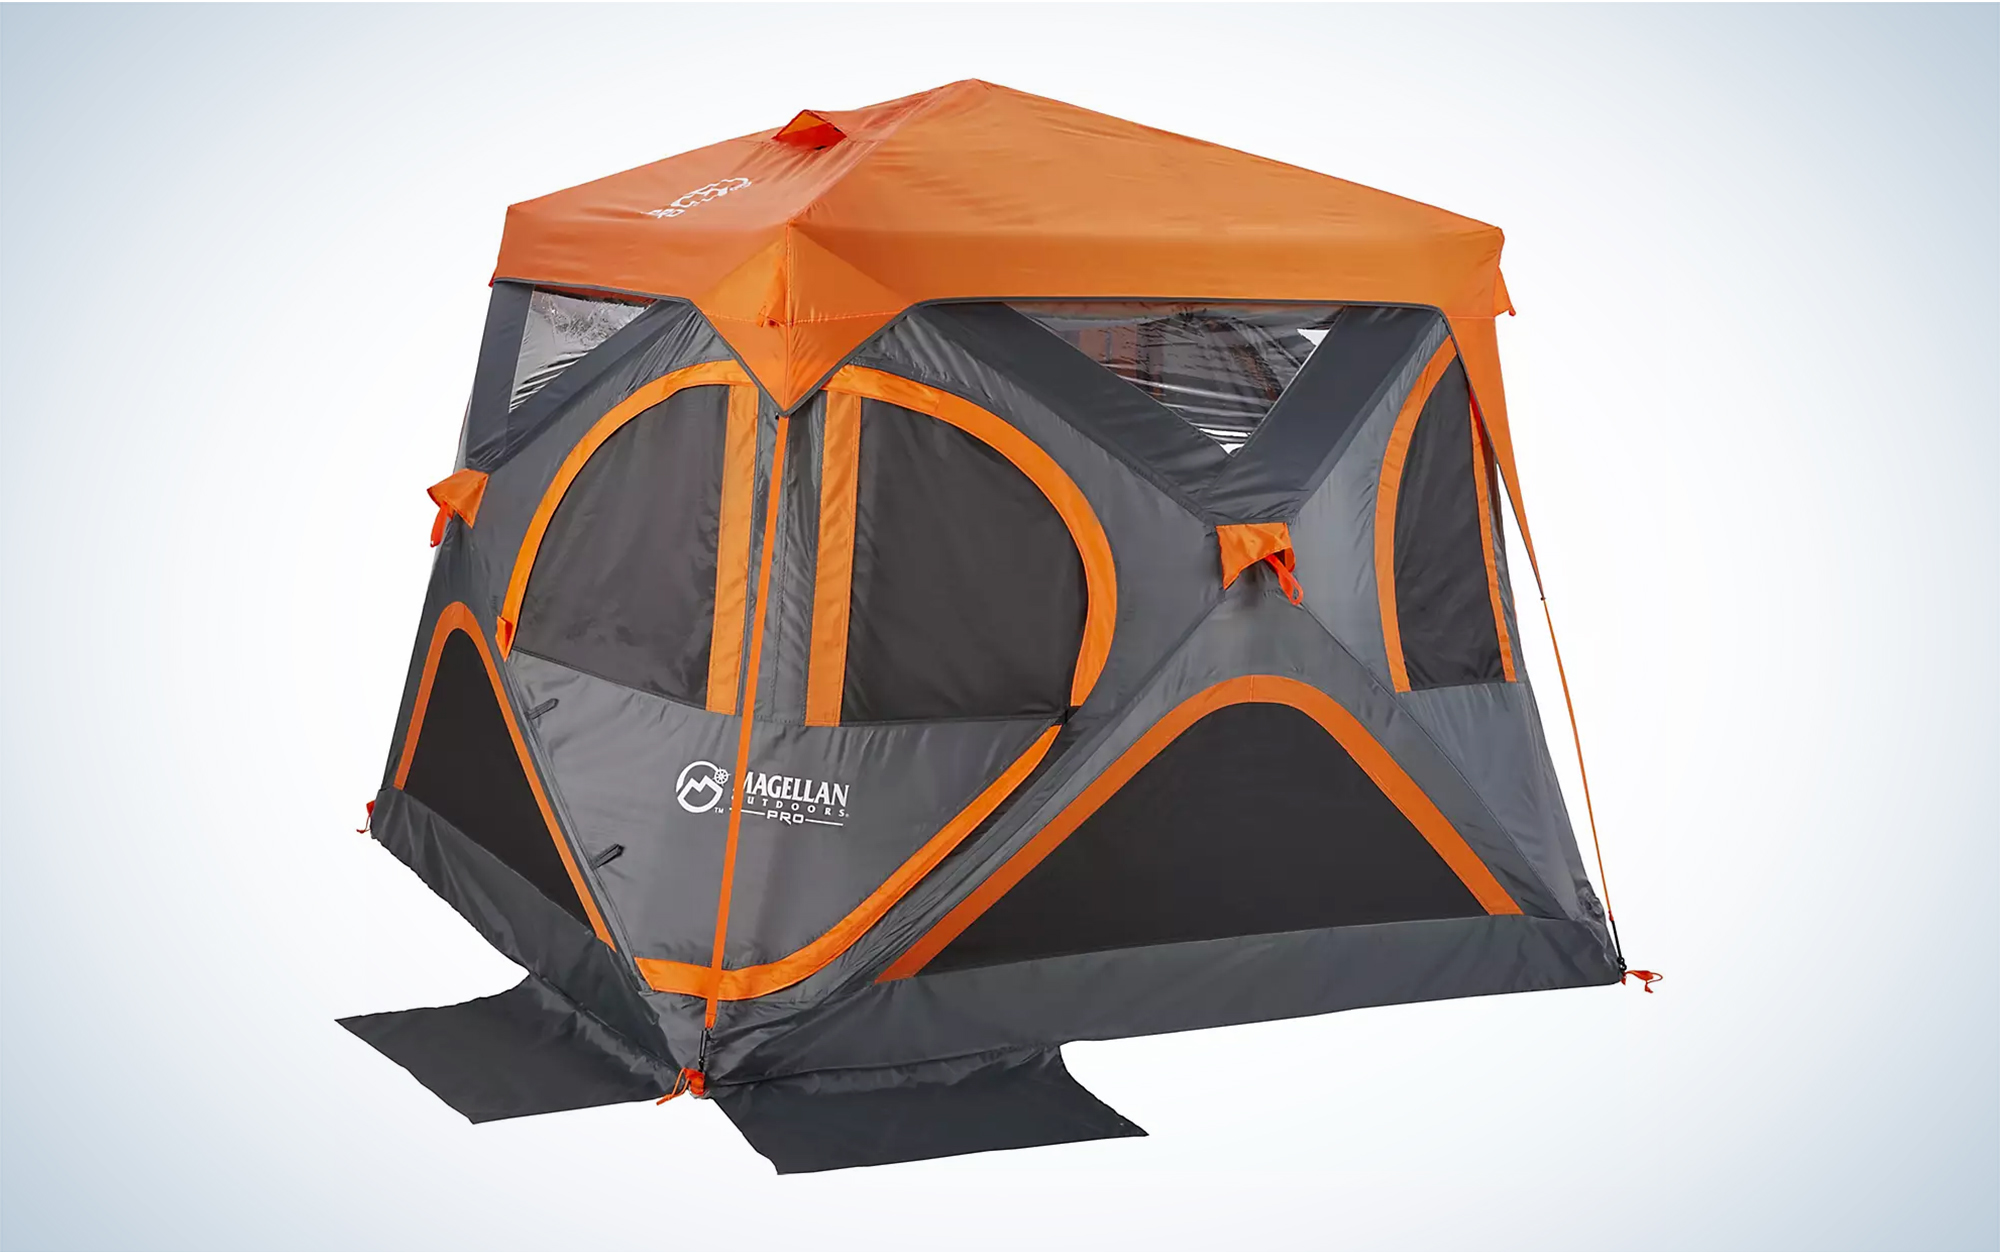 th?q=2023 Top tents secure when 